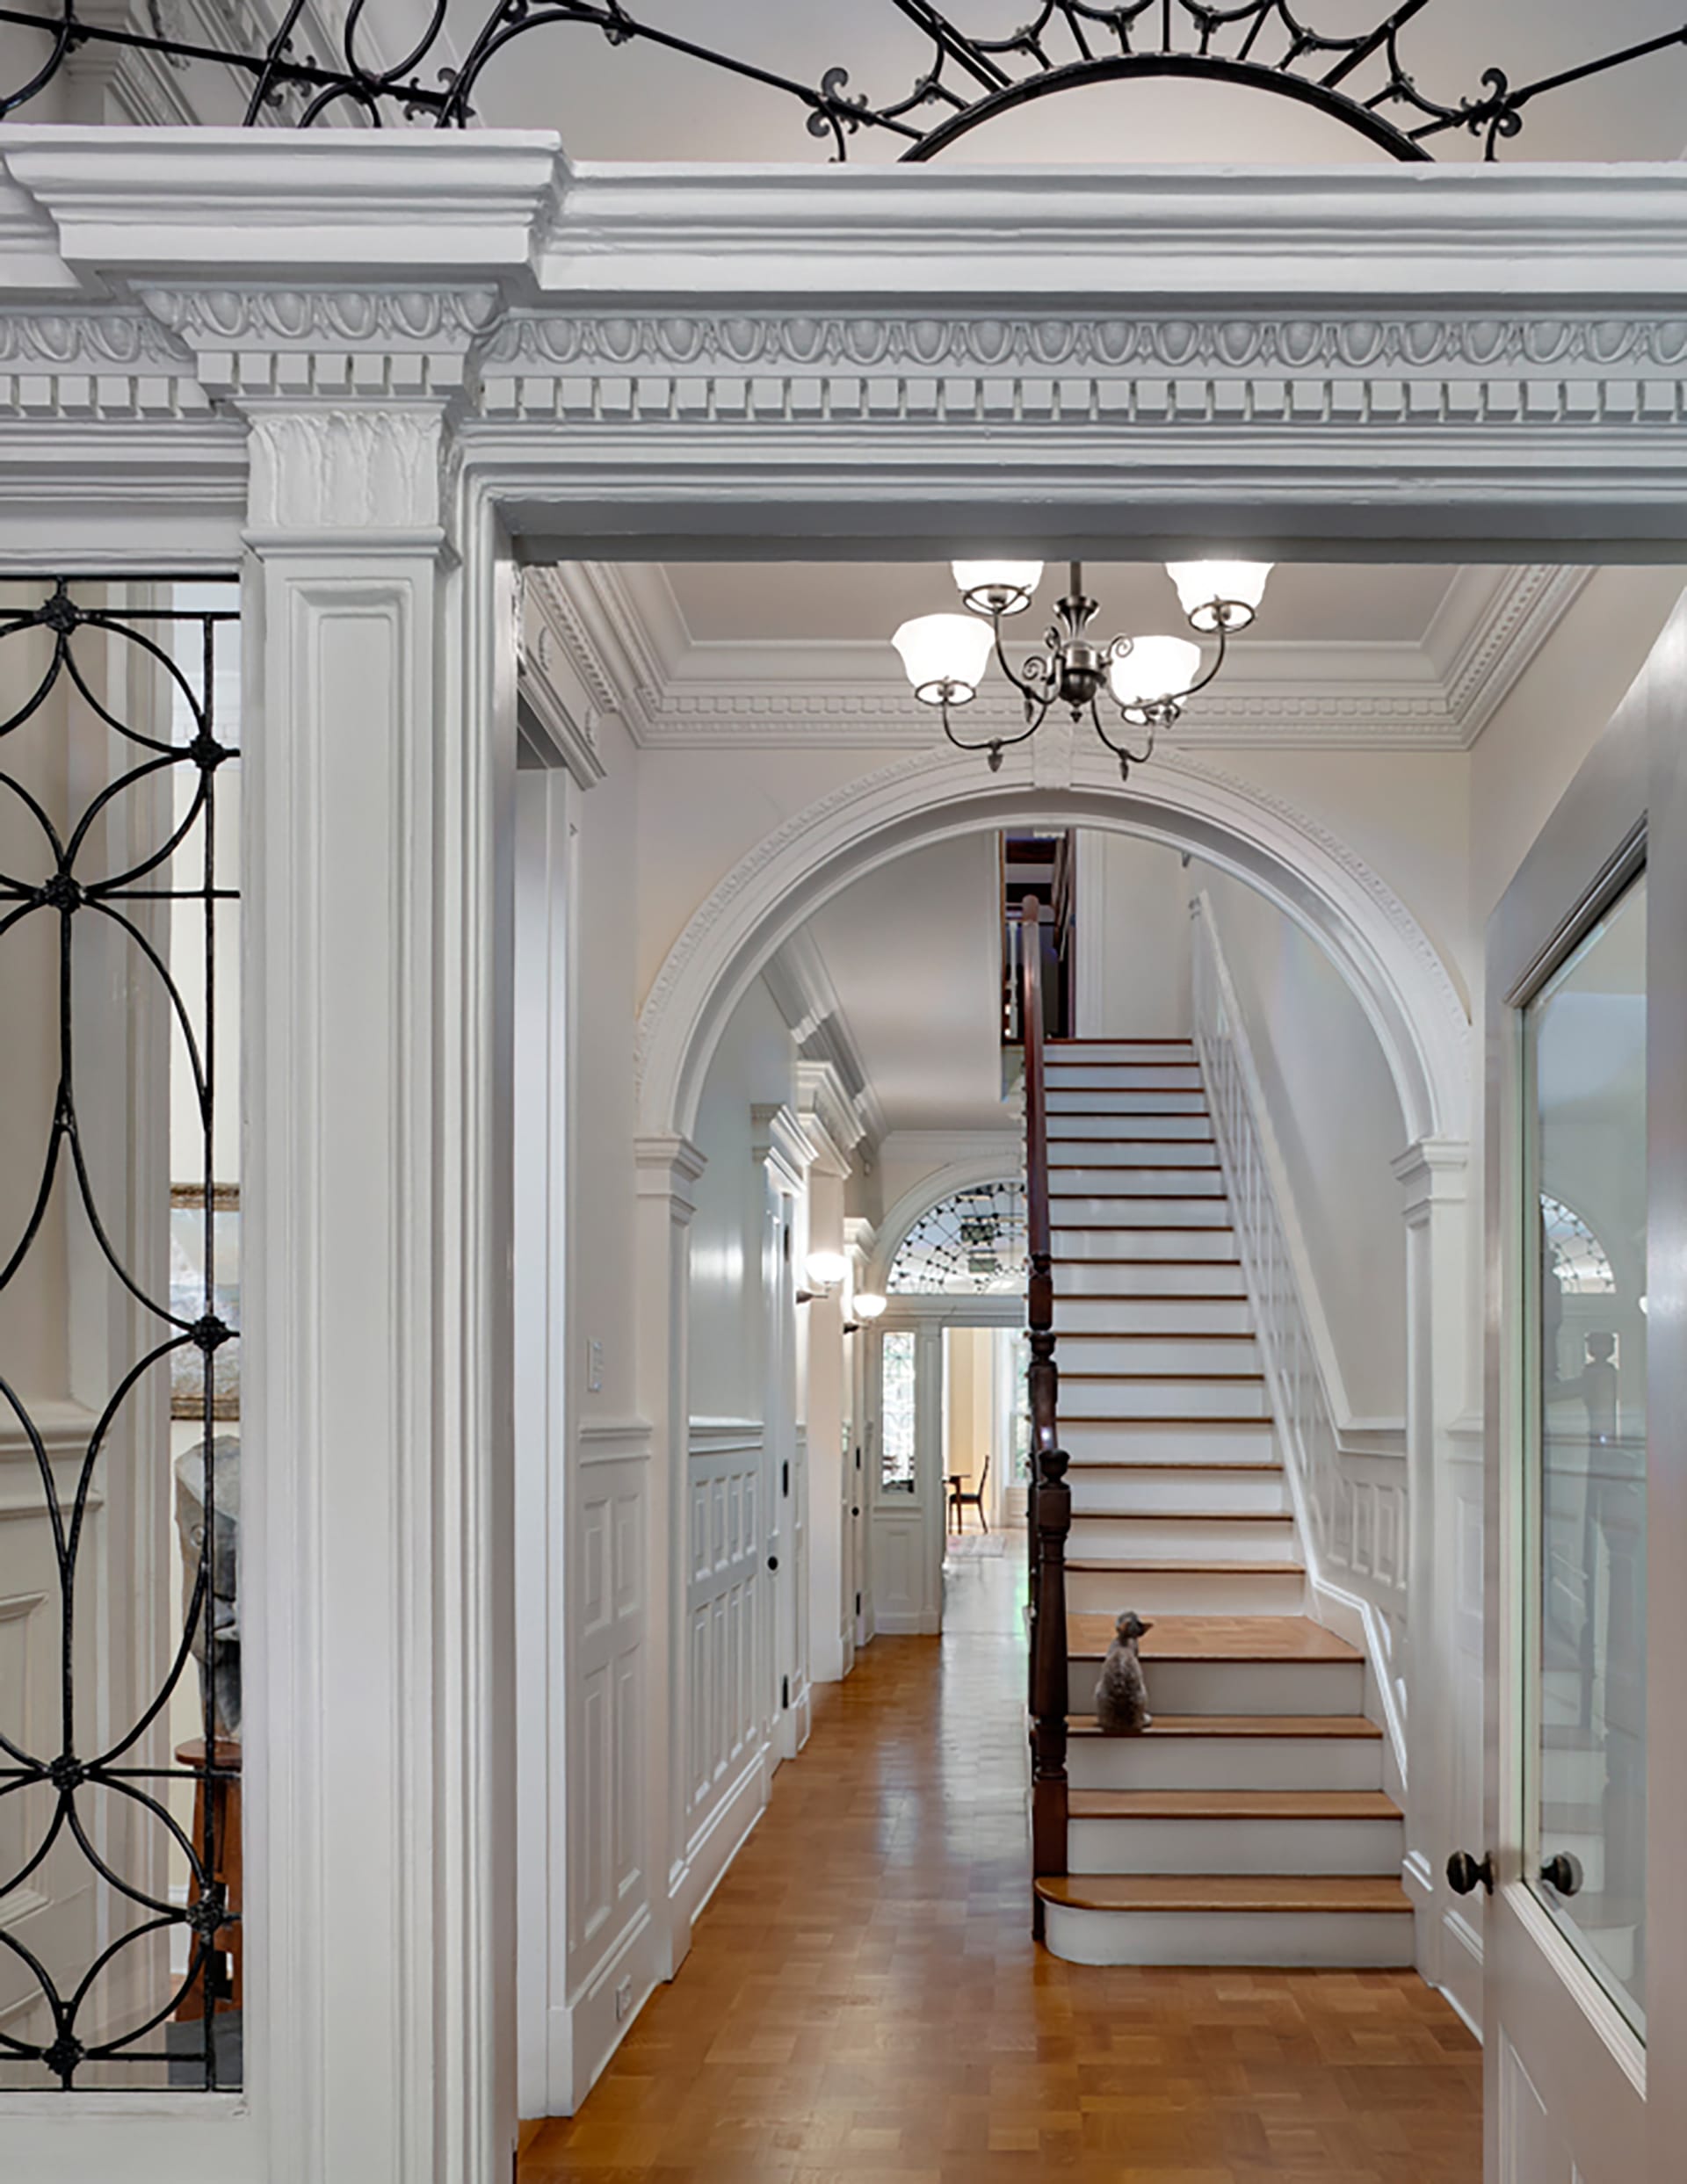 Ironwork, molding, archways, and staircase hallway in a Brooklyn Heights townhouse.